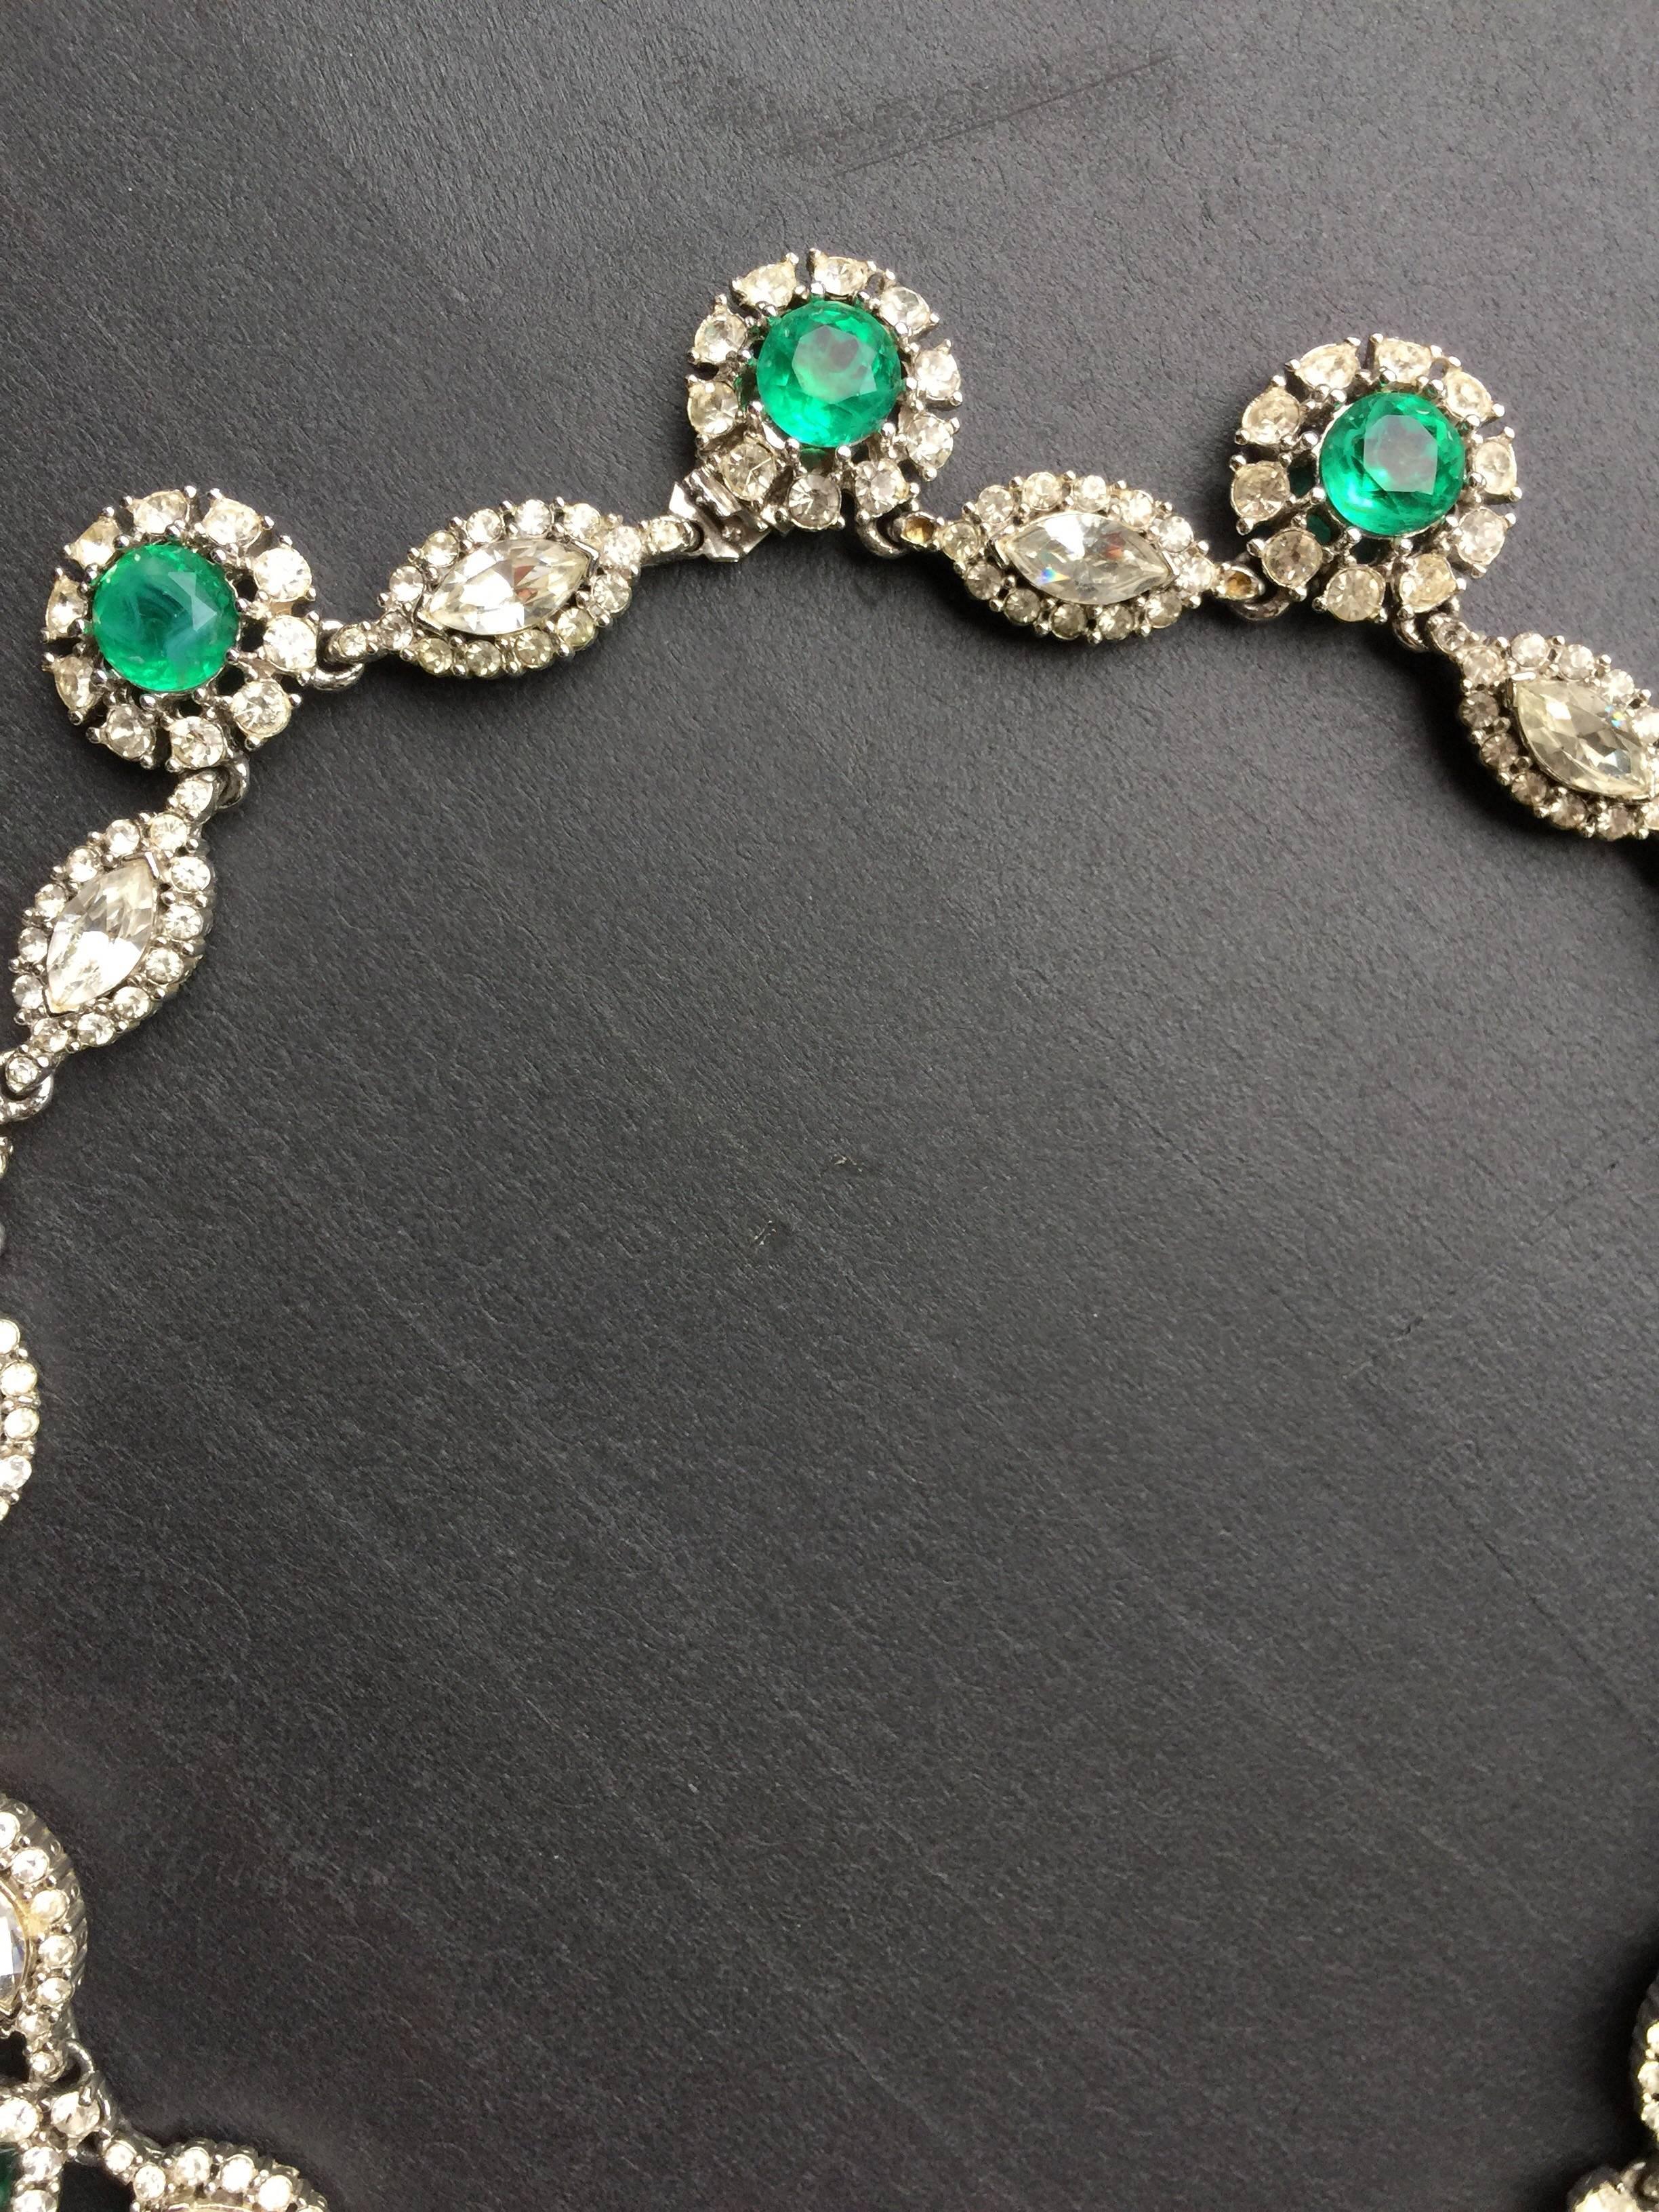 Women's or Men's Ciner emerald colored crystal necklace